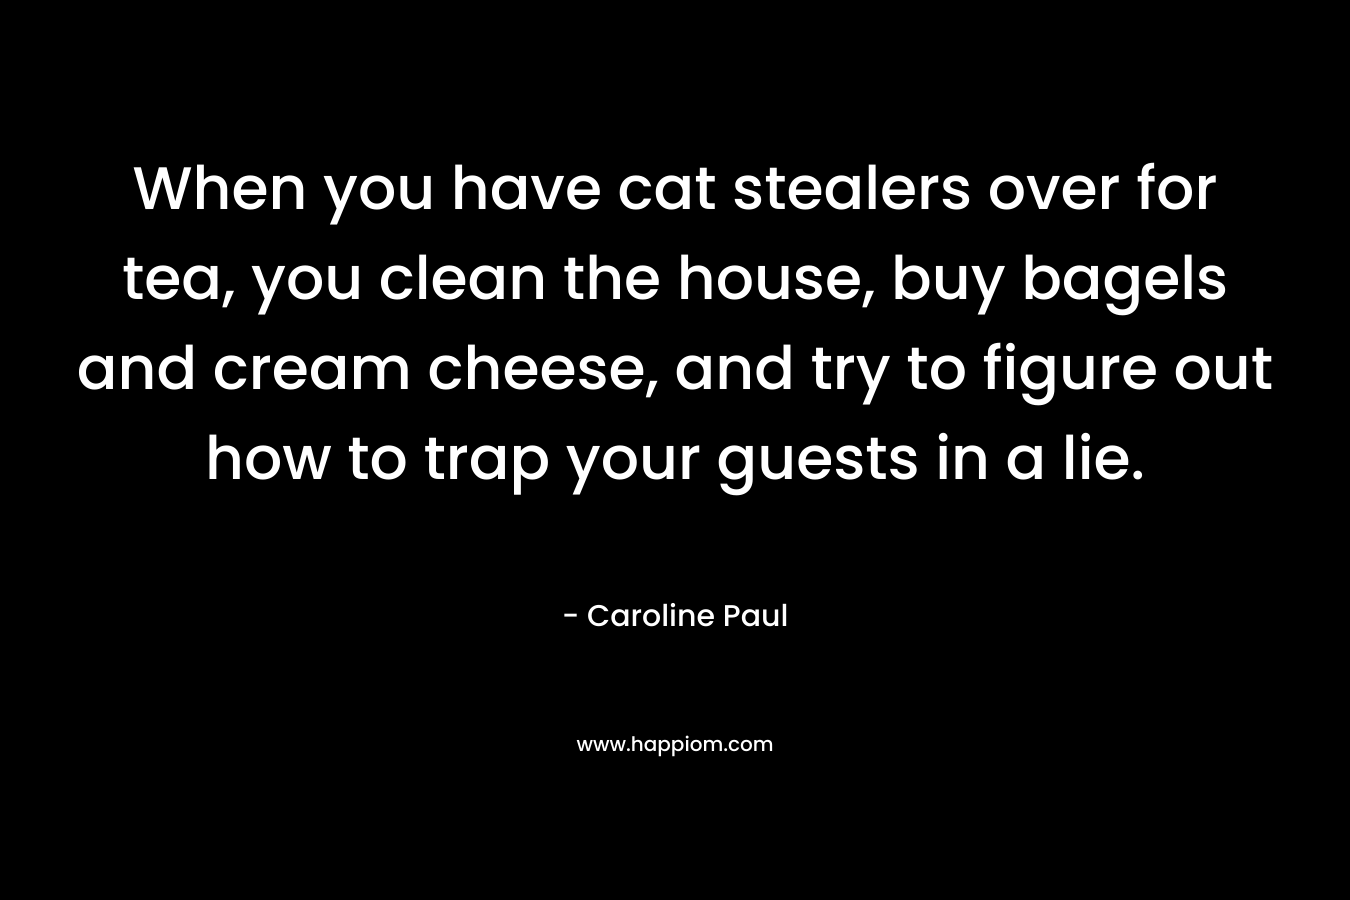 When you have cat stealers over for tea, you clean the house, buy bagels and cream cheese, and try to figure out how to trap your guests in a lie. – Caroline Paul